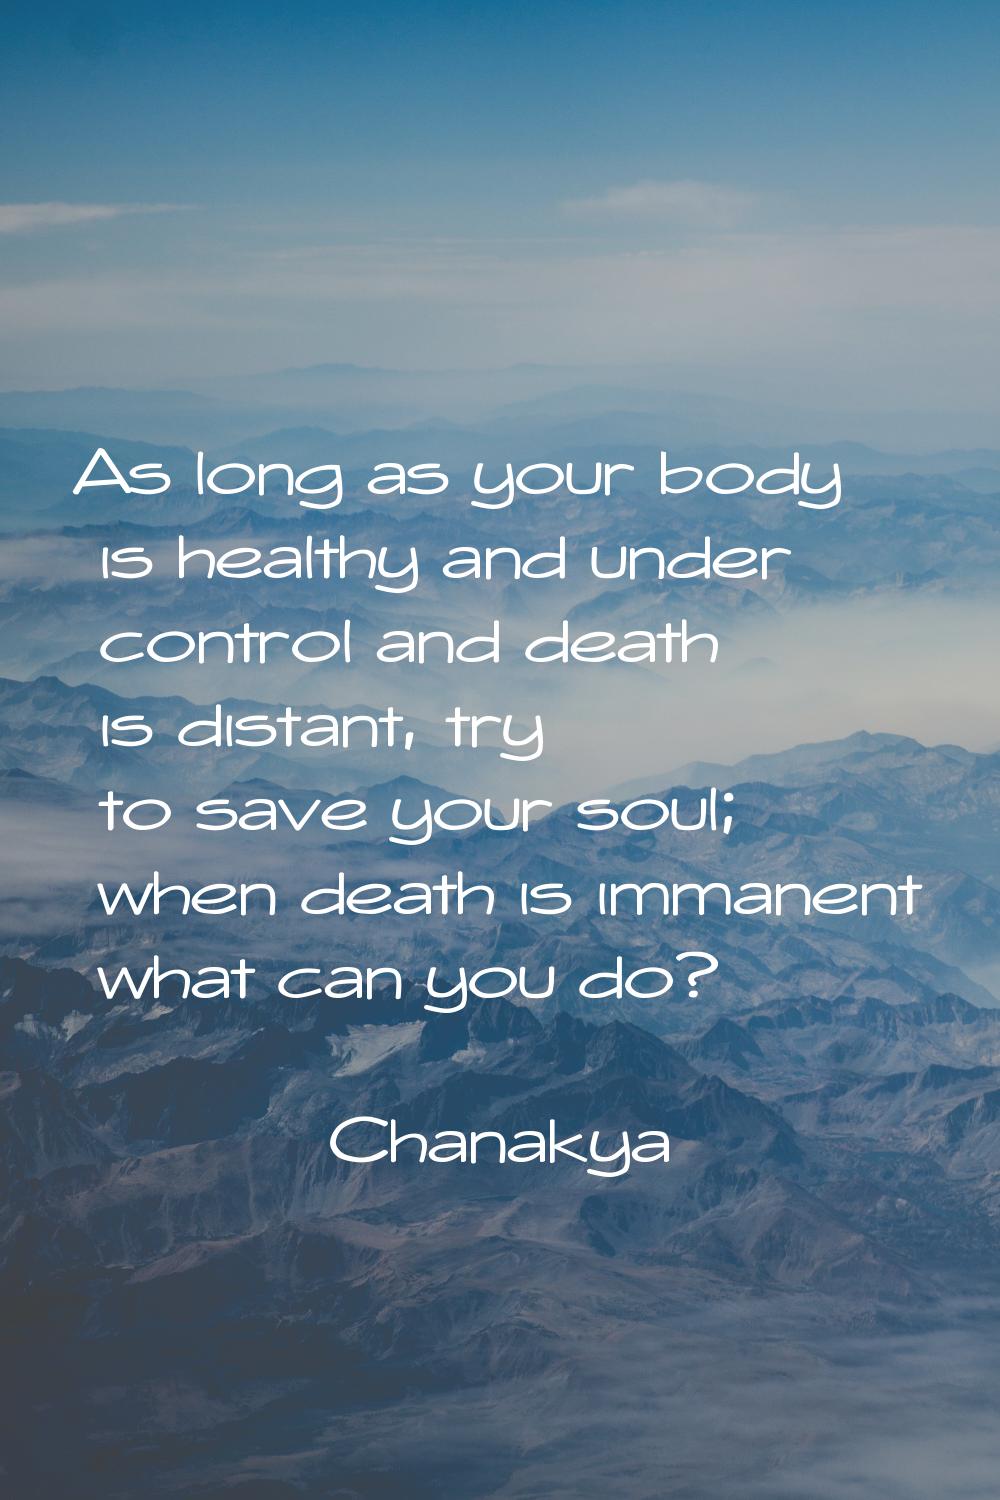 As long as your body is healthy and under control and death is distant, try to save your soul; when